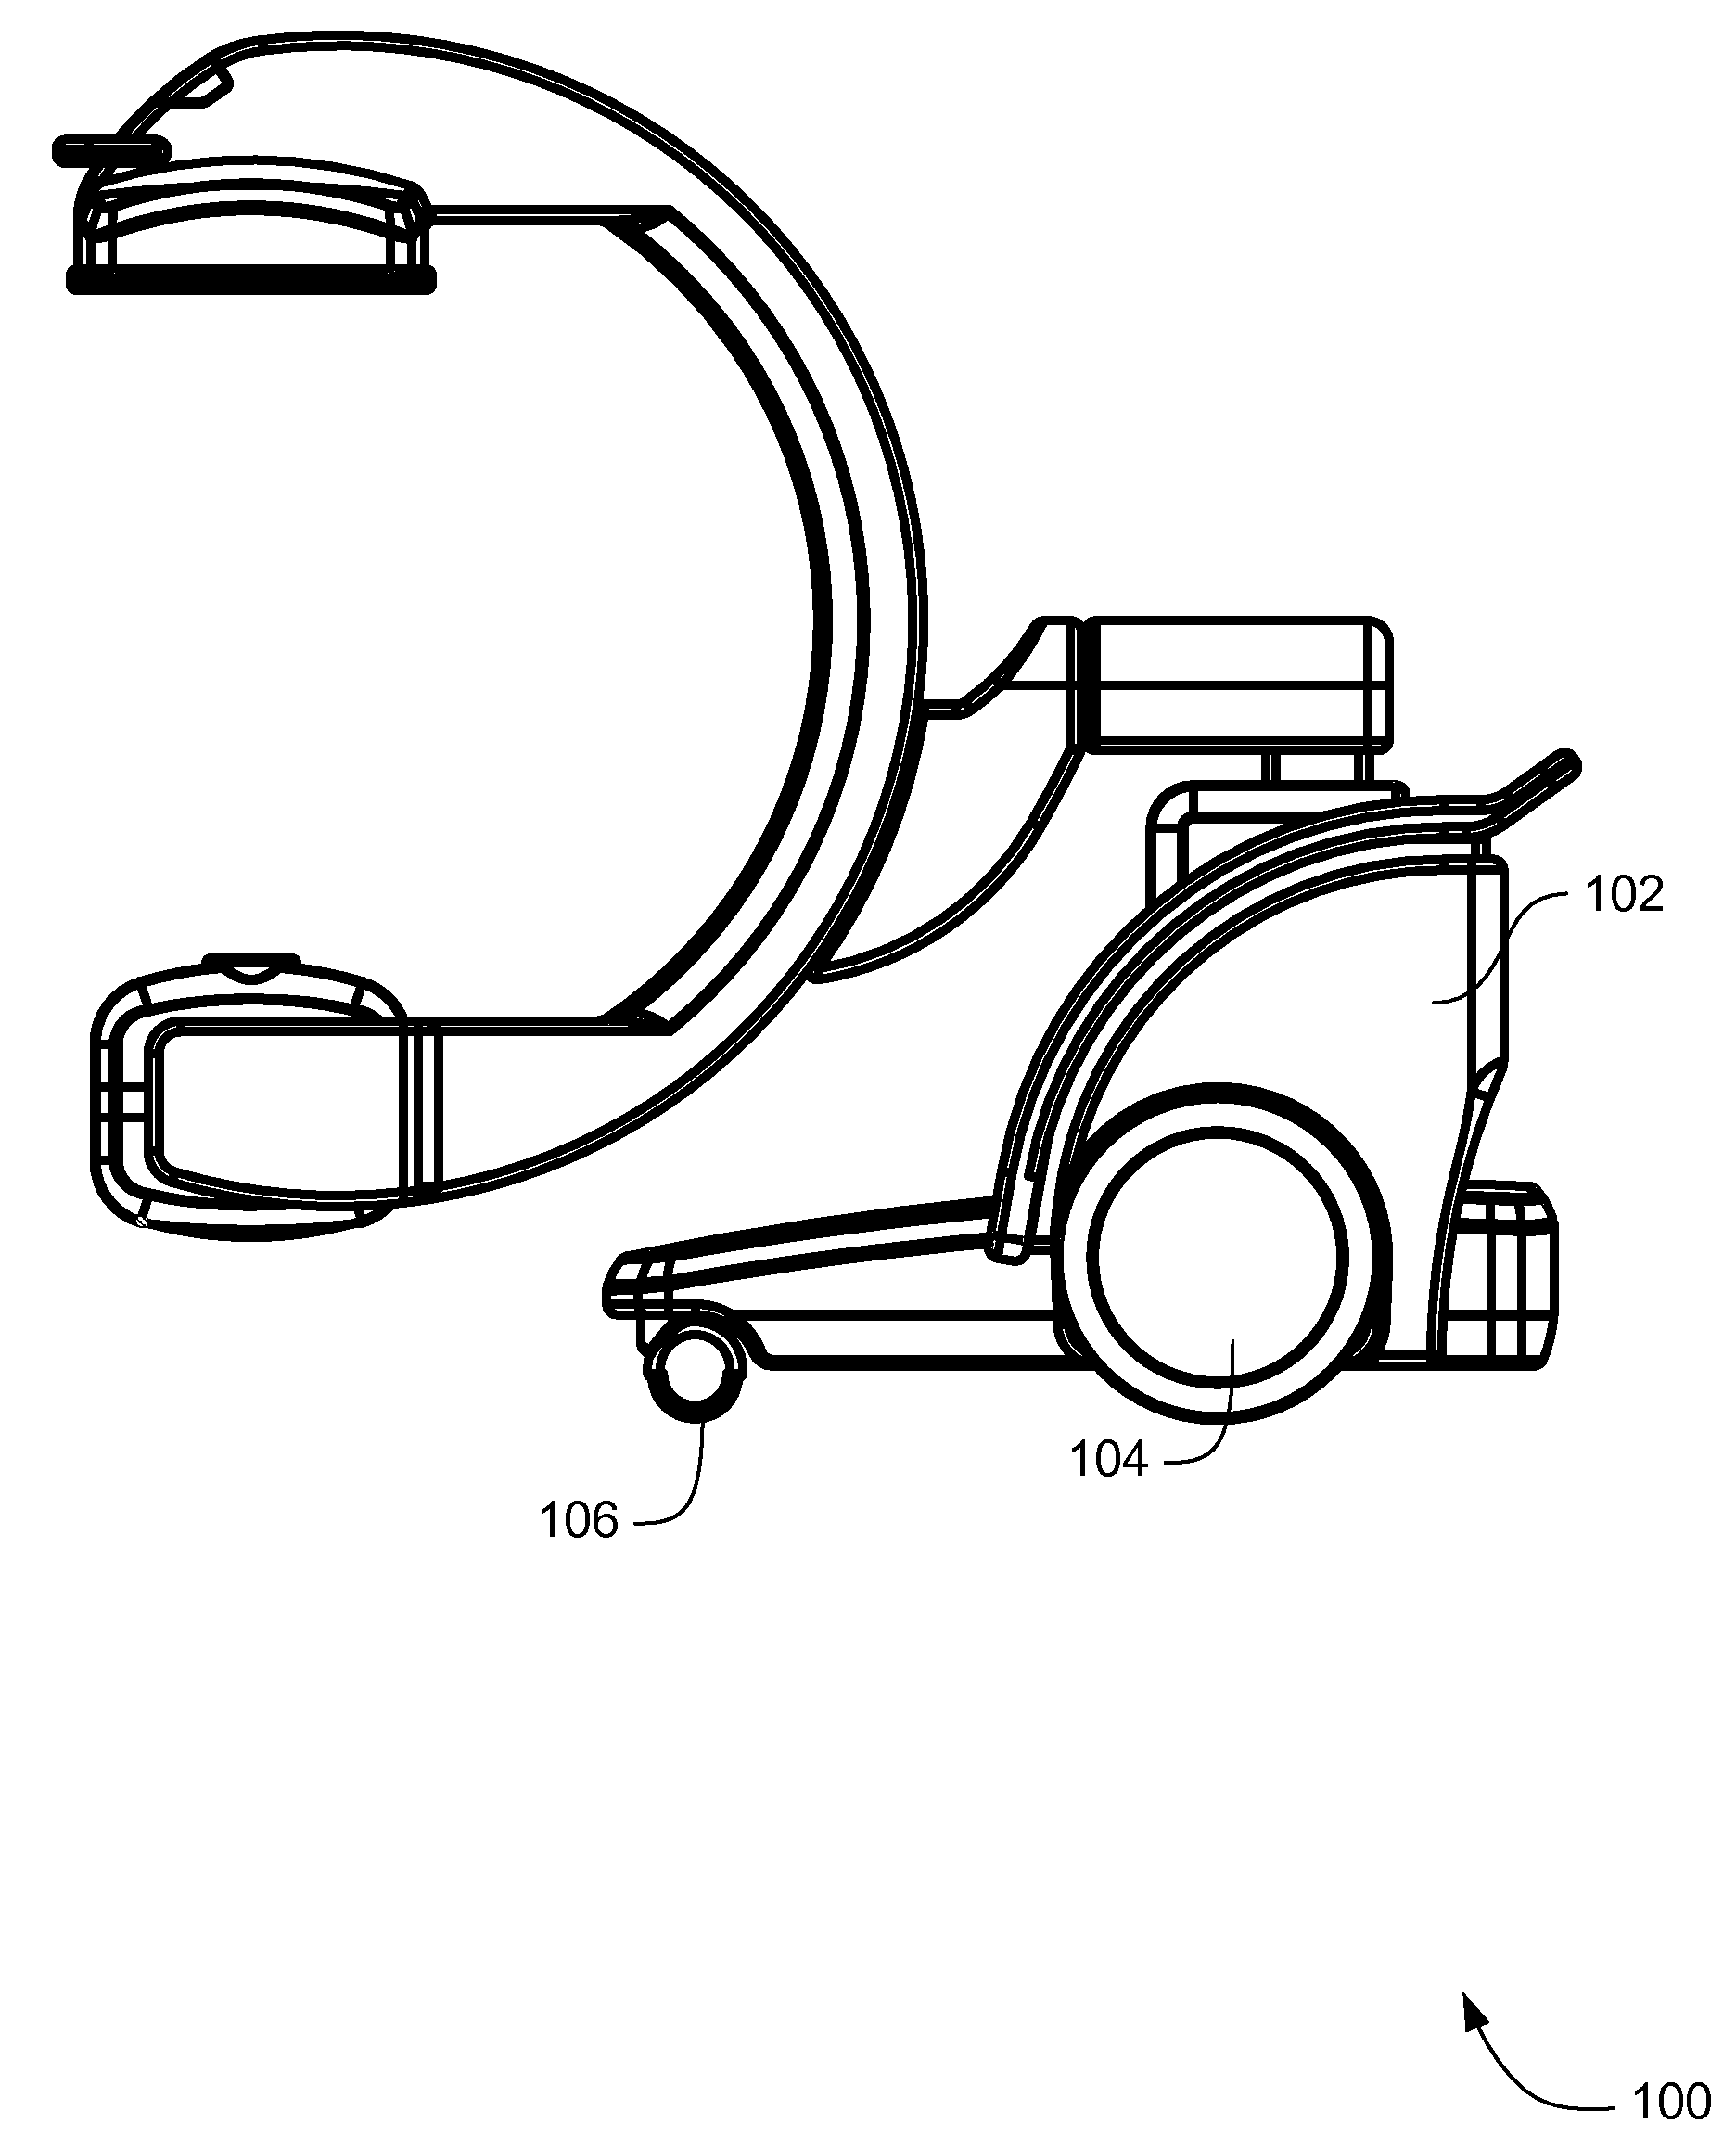 Systems, methods and apparatus of motorised independent main-wheel drive and positioning for a mobile imaging system